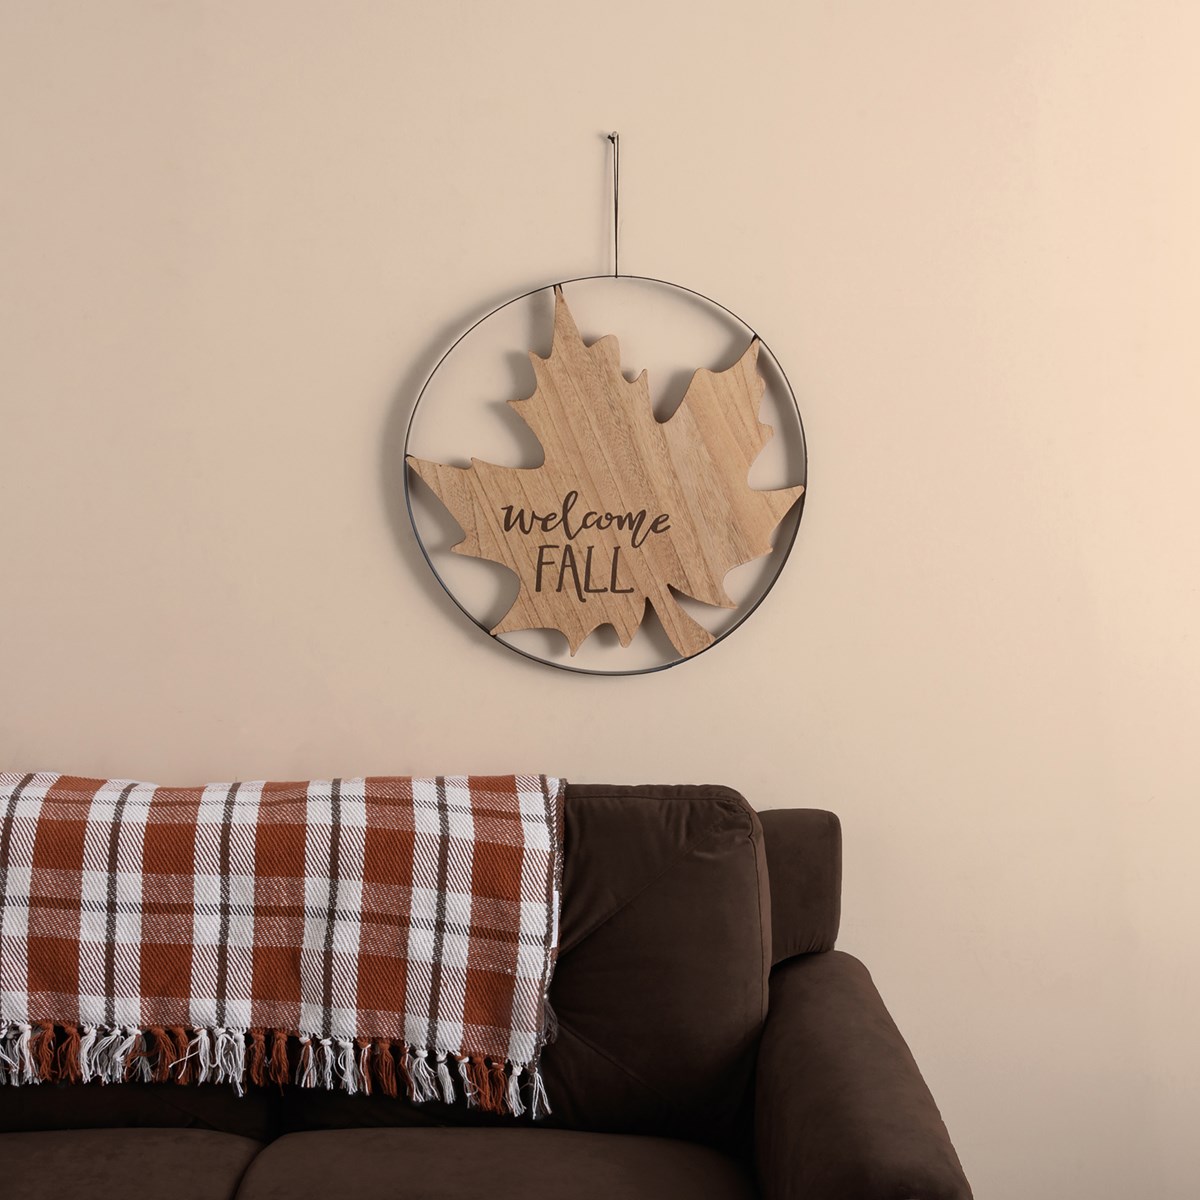 Welcome Fall Leaf Wall Decor - Metal, Wood, Leather